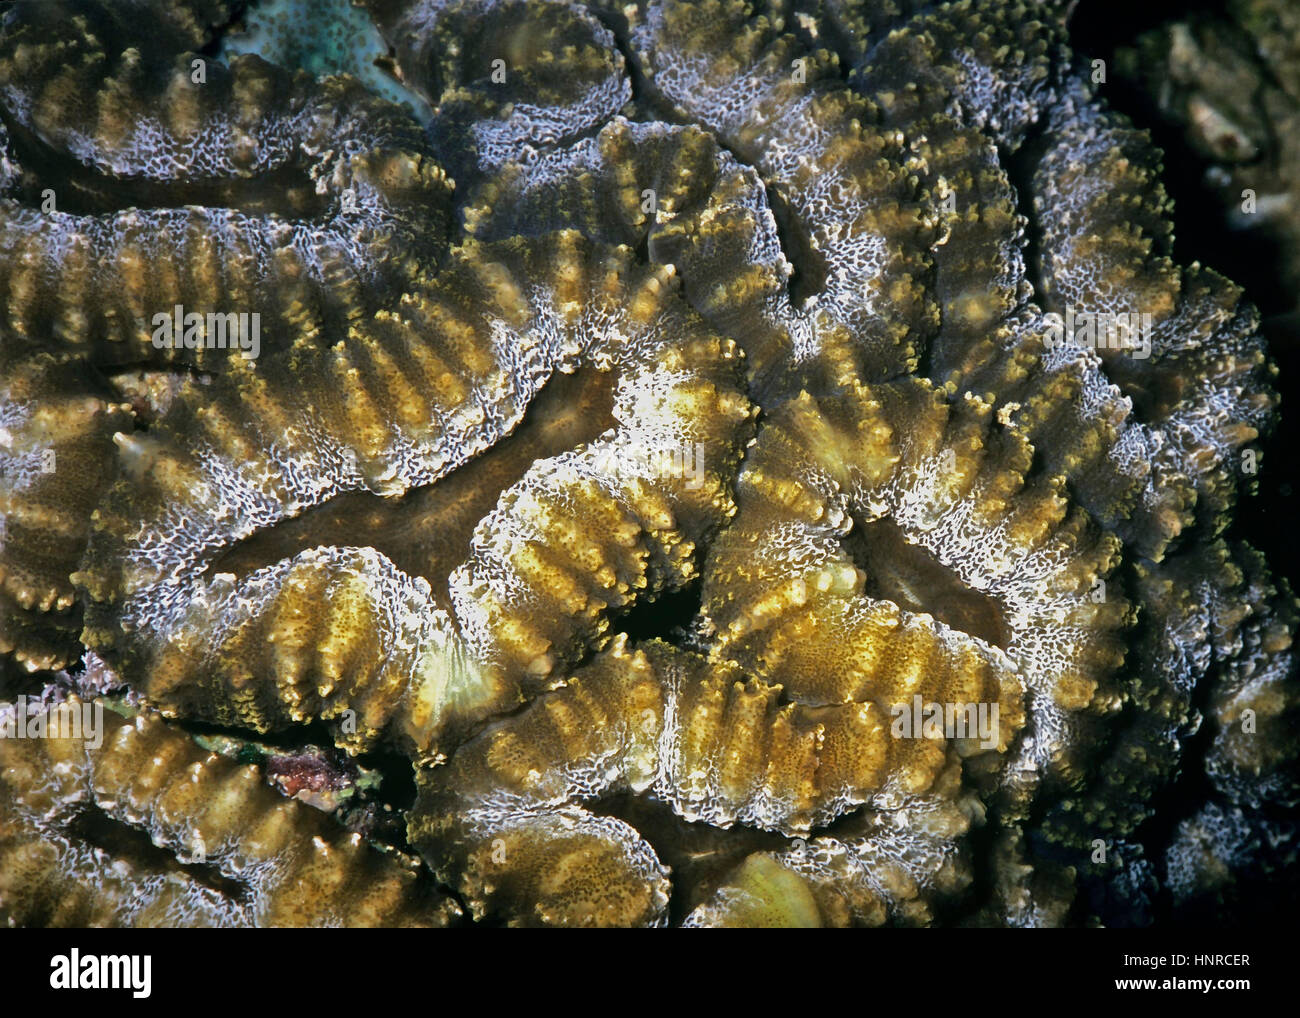 This picture of a hard coral (Favites complanata) shows the thick walls secreted by individual polyps: the reef's building blocks. Bali, Indonesia. Stock Photo